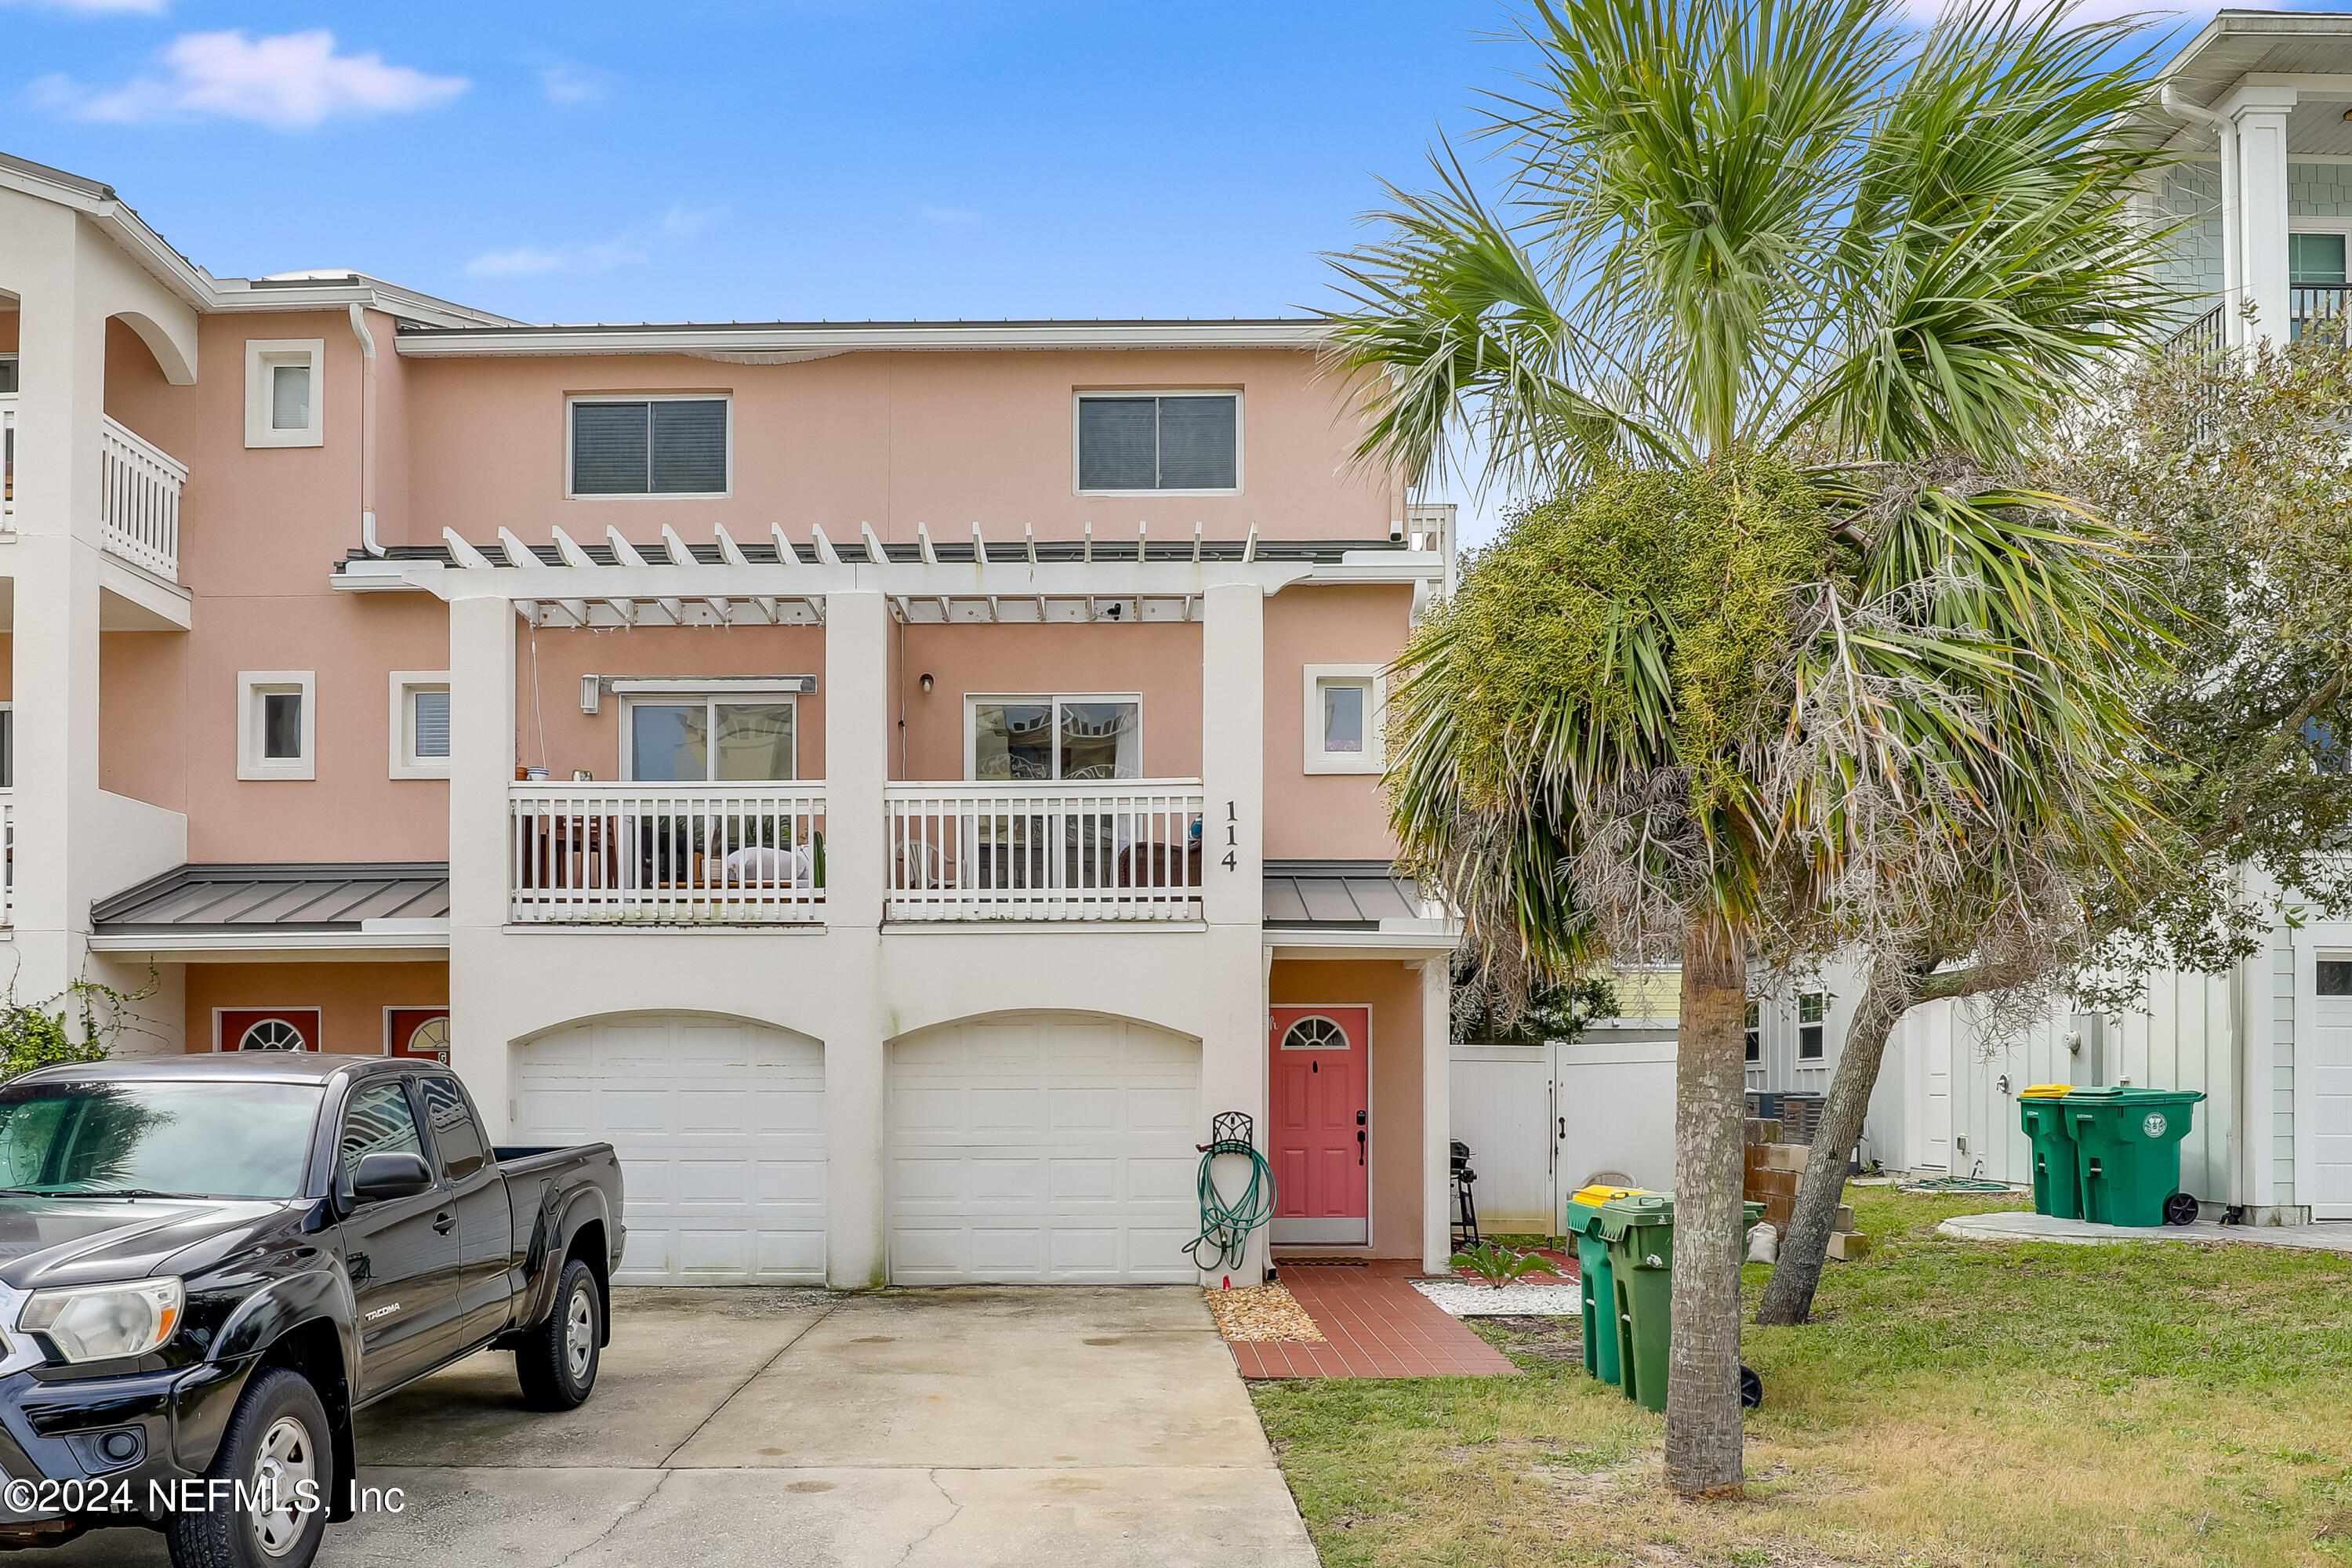 Jacksonville Beach, FL home for sale located at 114 18th Avenue N Unit H, Jacksonville Beach, FL 32250